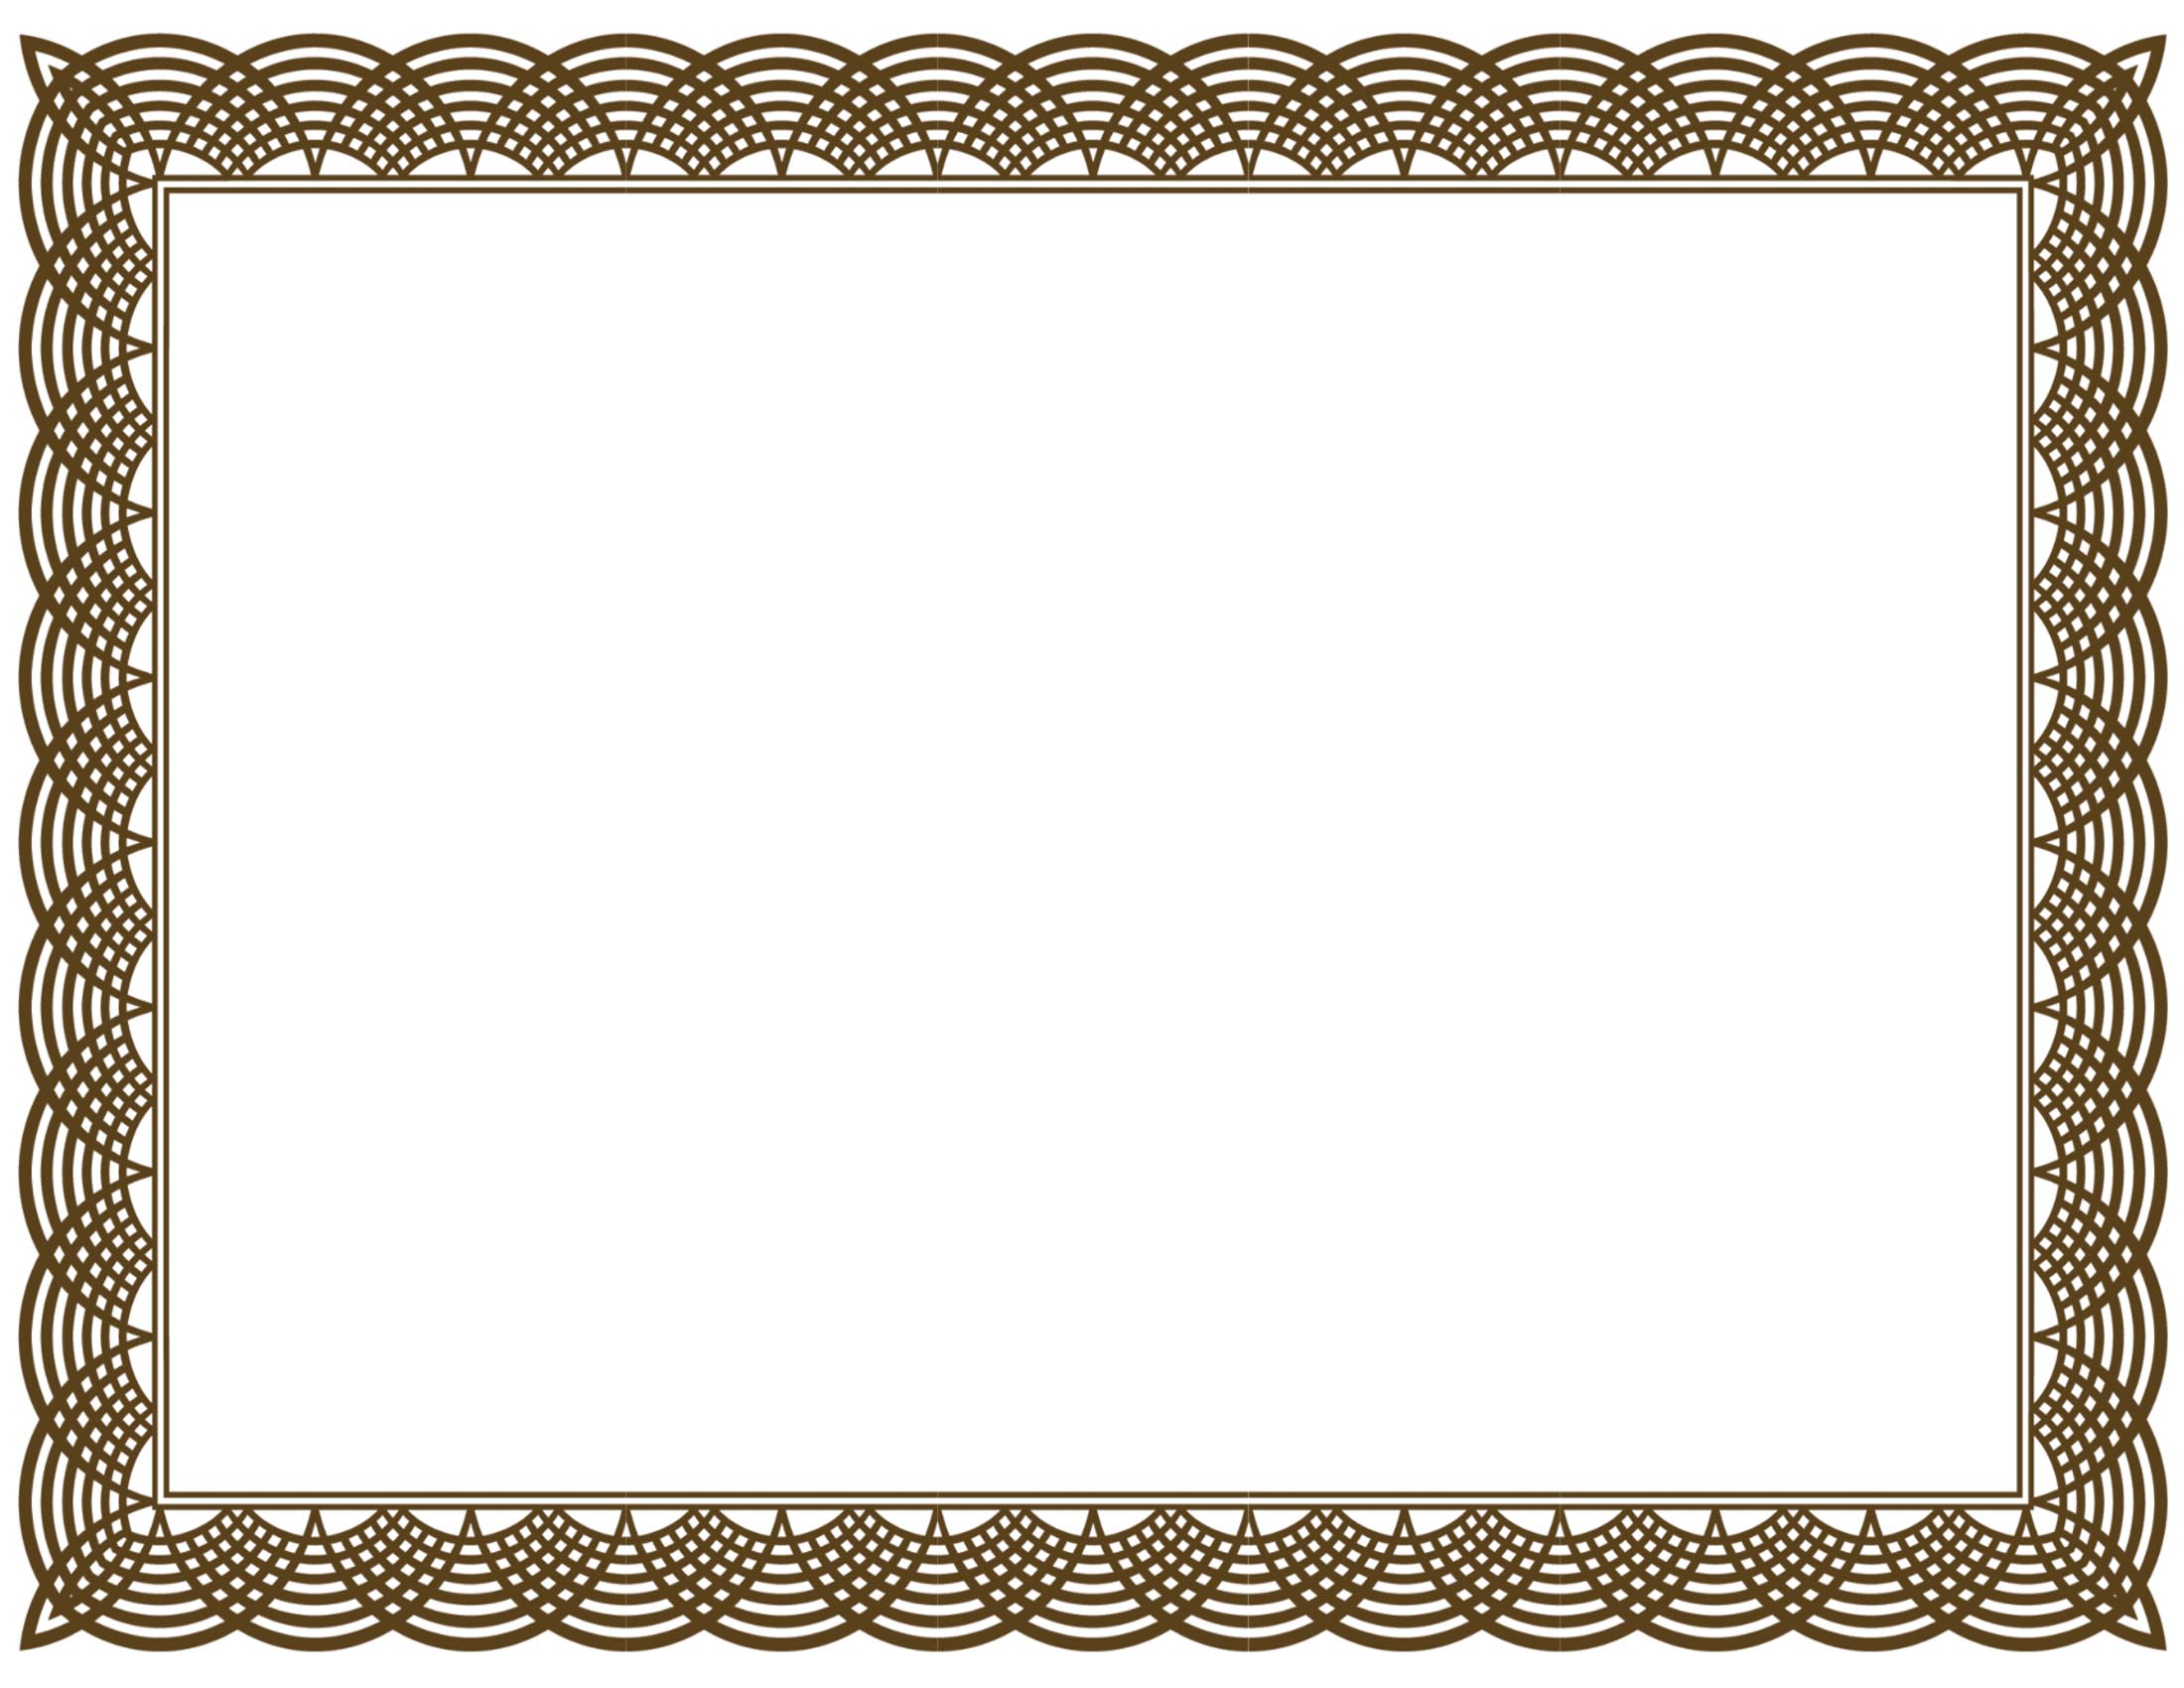 Royalty Free Certificate Border Clip Art, Vector Images 